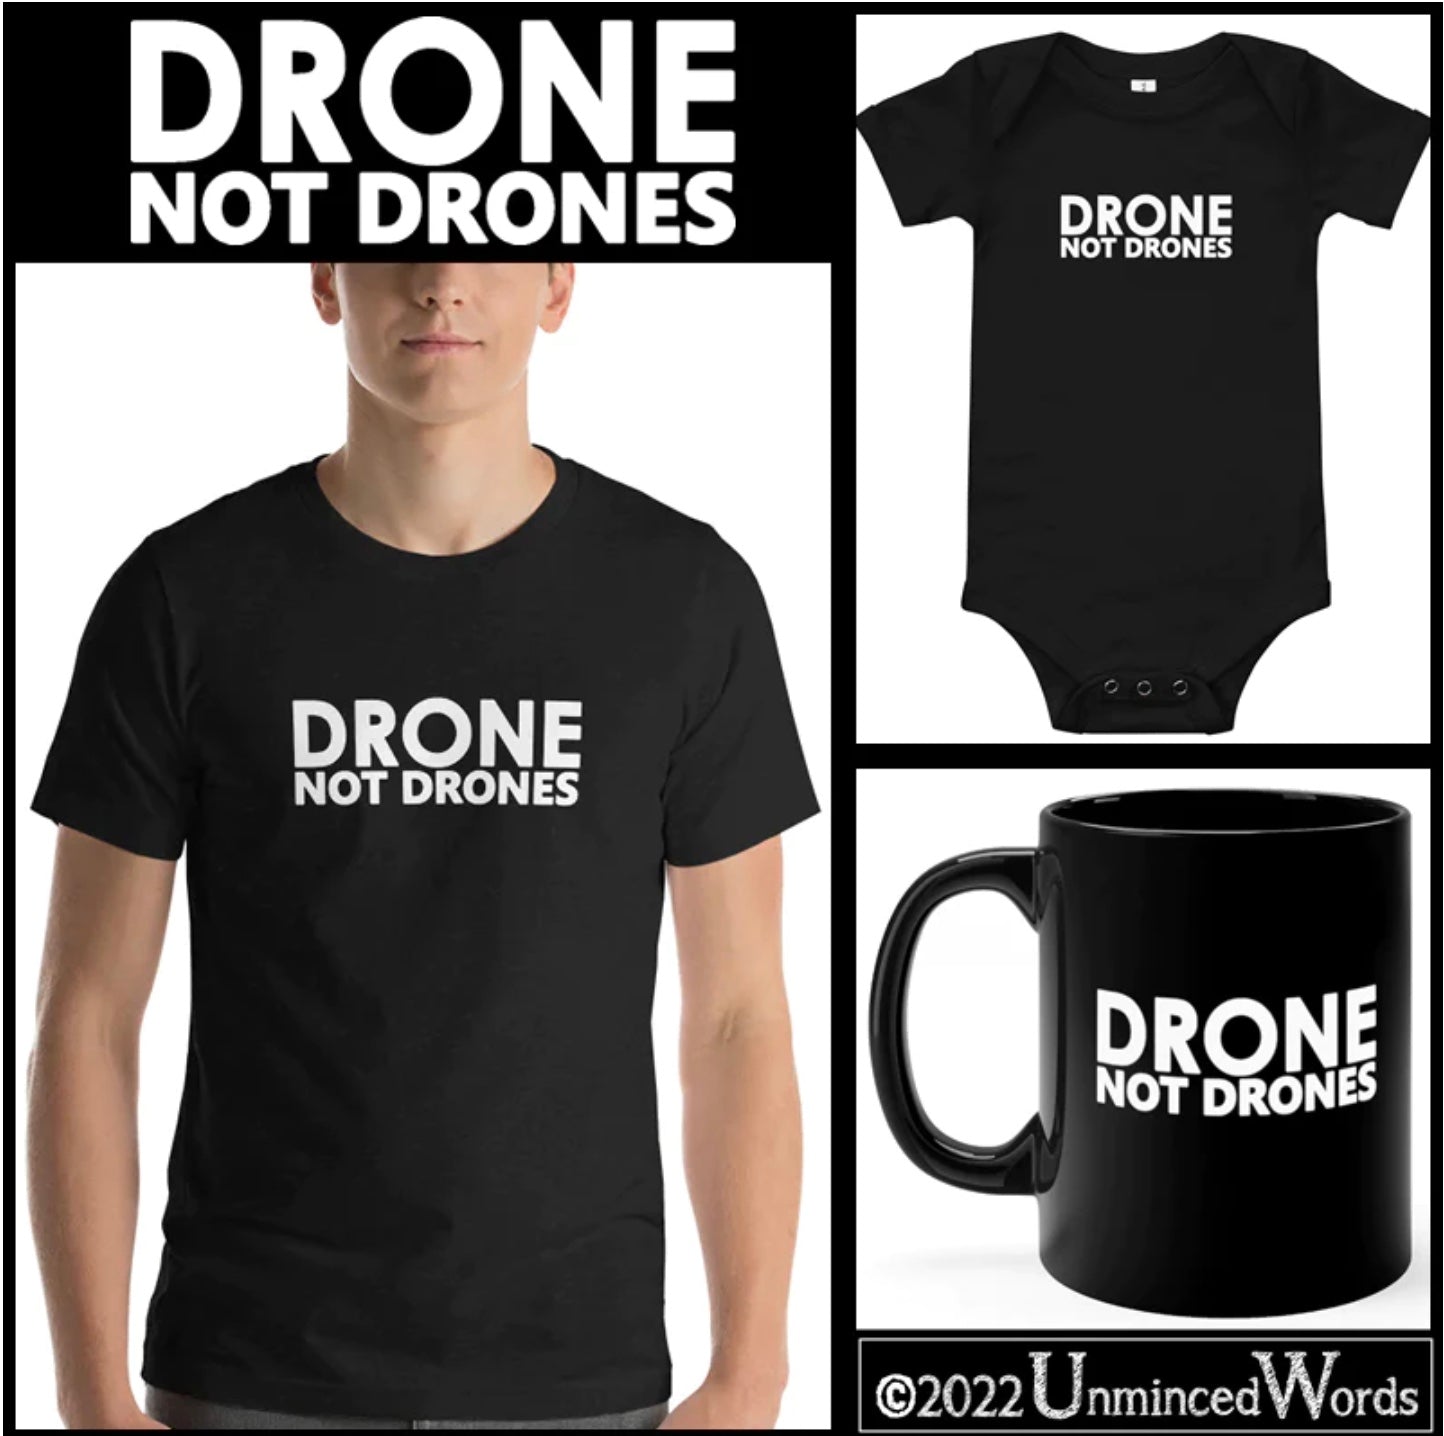 Drone Not Drones gifts are consistent